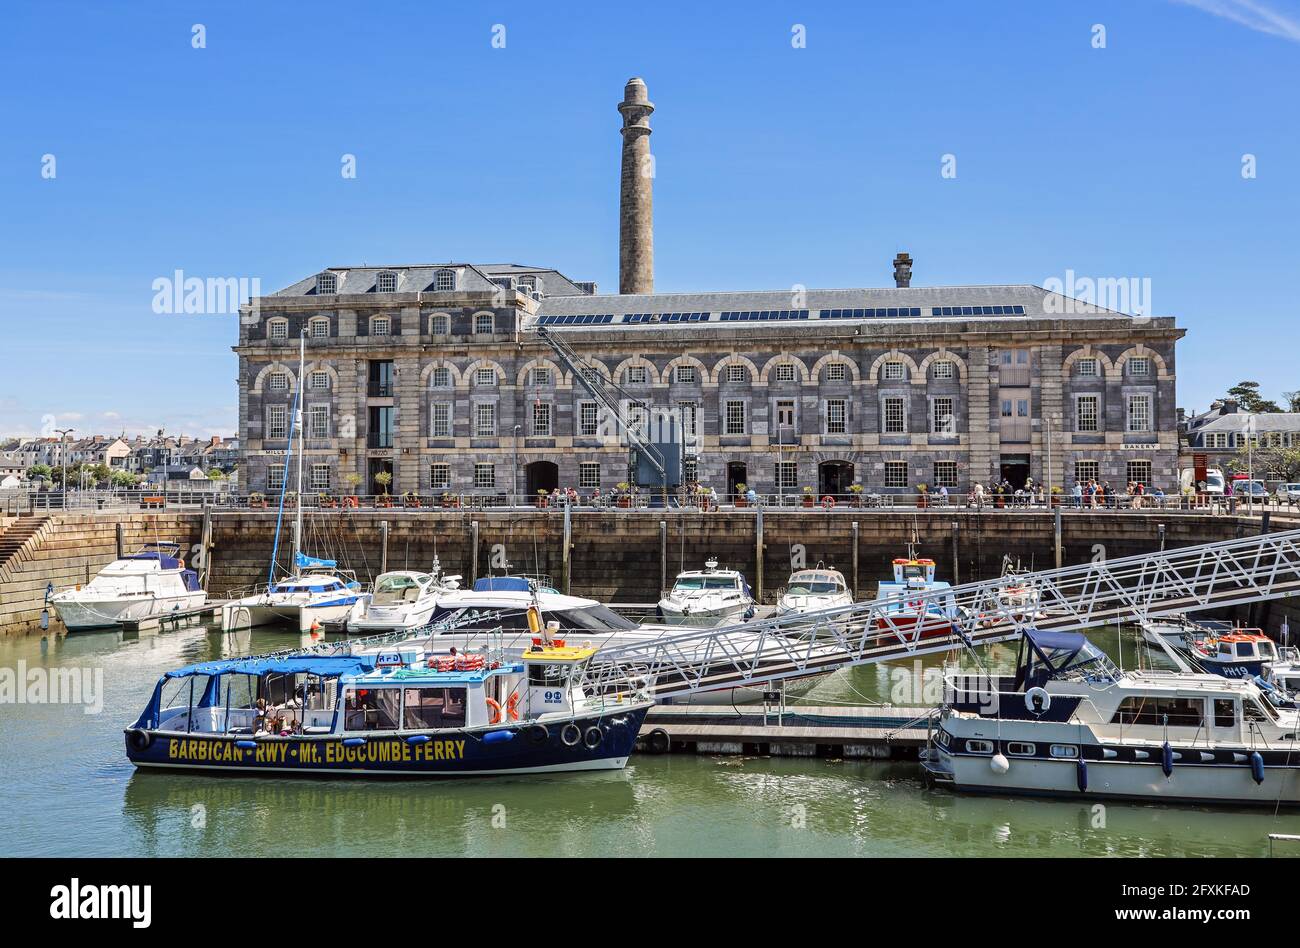 The Plymouth waterfront ferry berthed in the pool at the Royal William Yard, in from Mount Edgcumbe Park on its way to the Barbican. Stock Photo